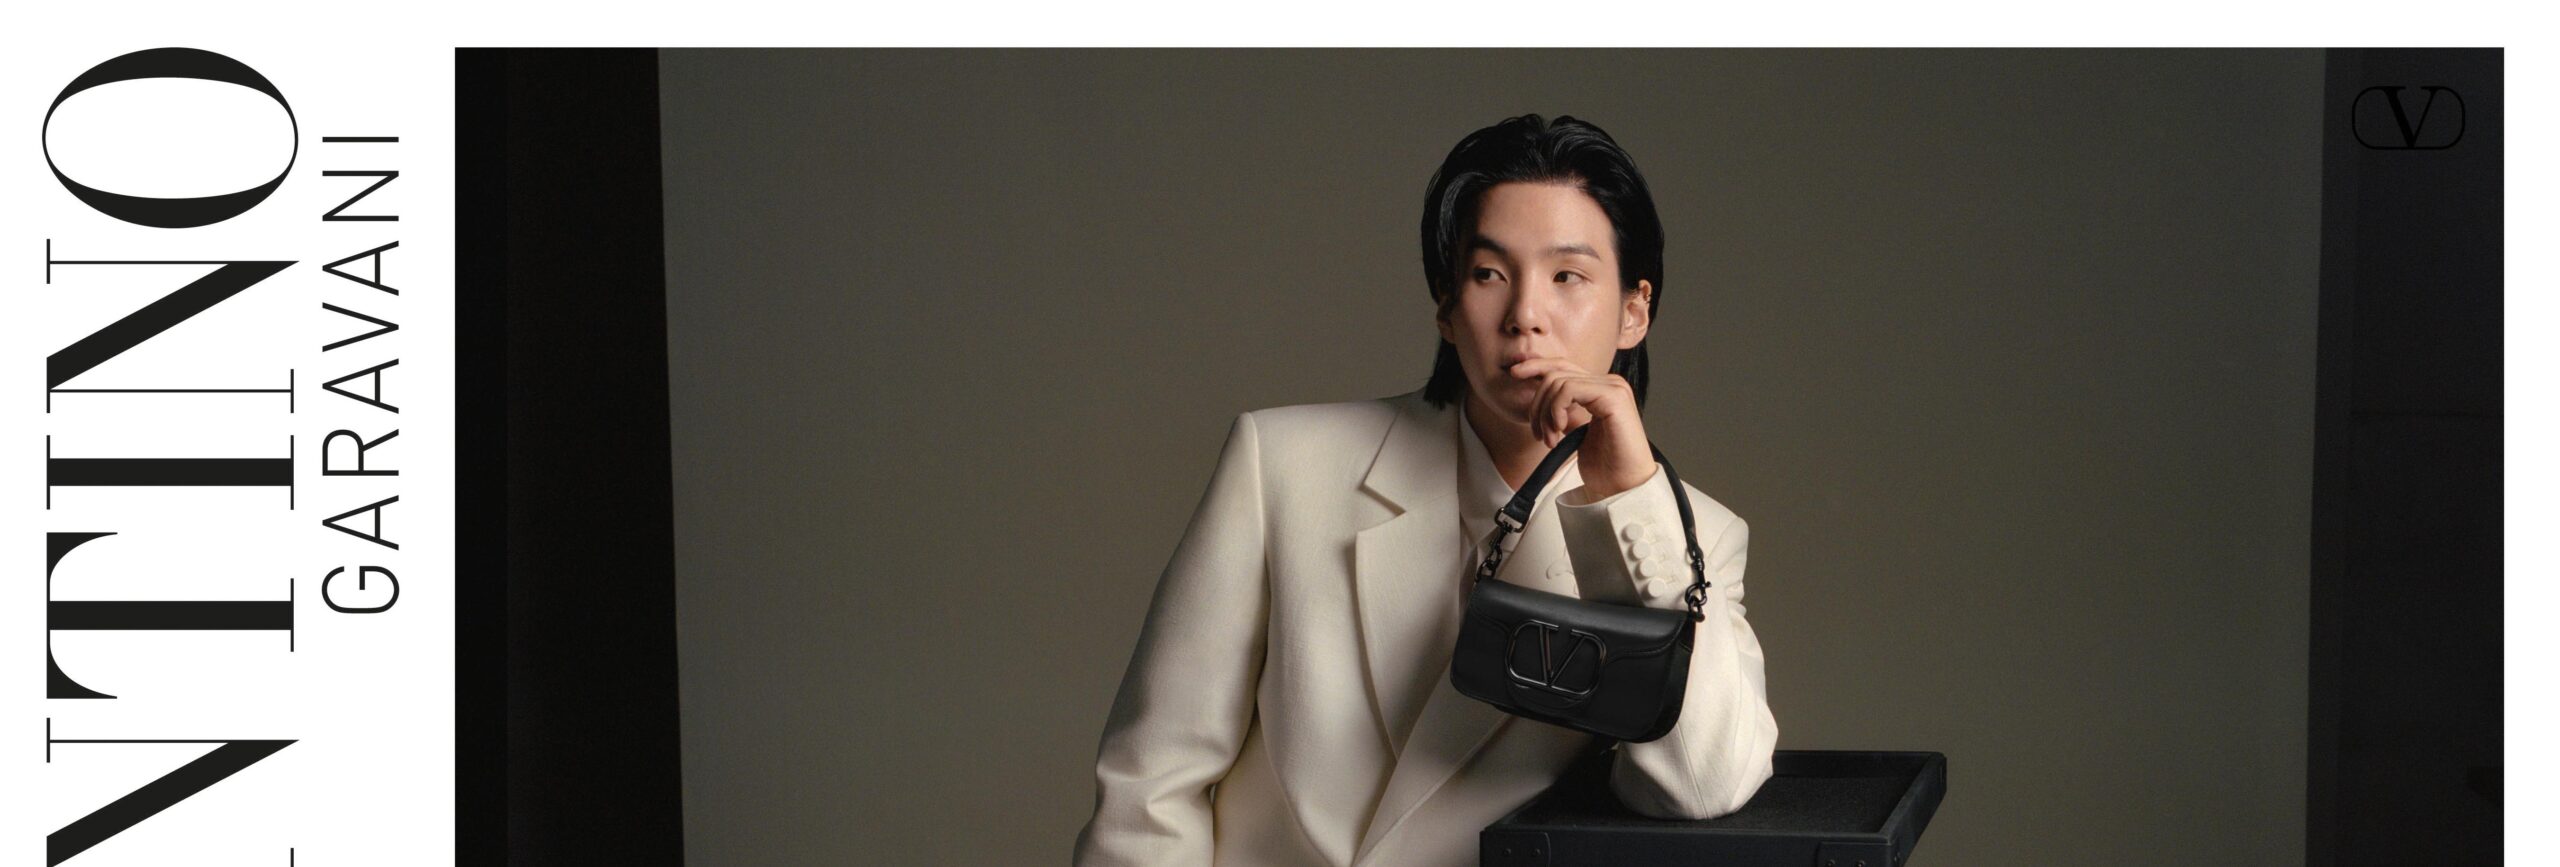 Suga of BTS poses with poise, leaning on a stand, adorned in an elegant beige suit and holding a small black handbag.